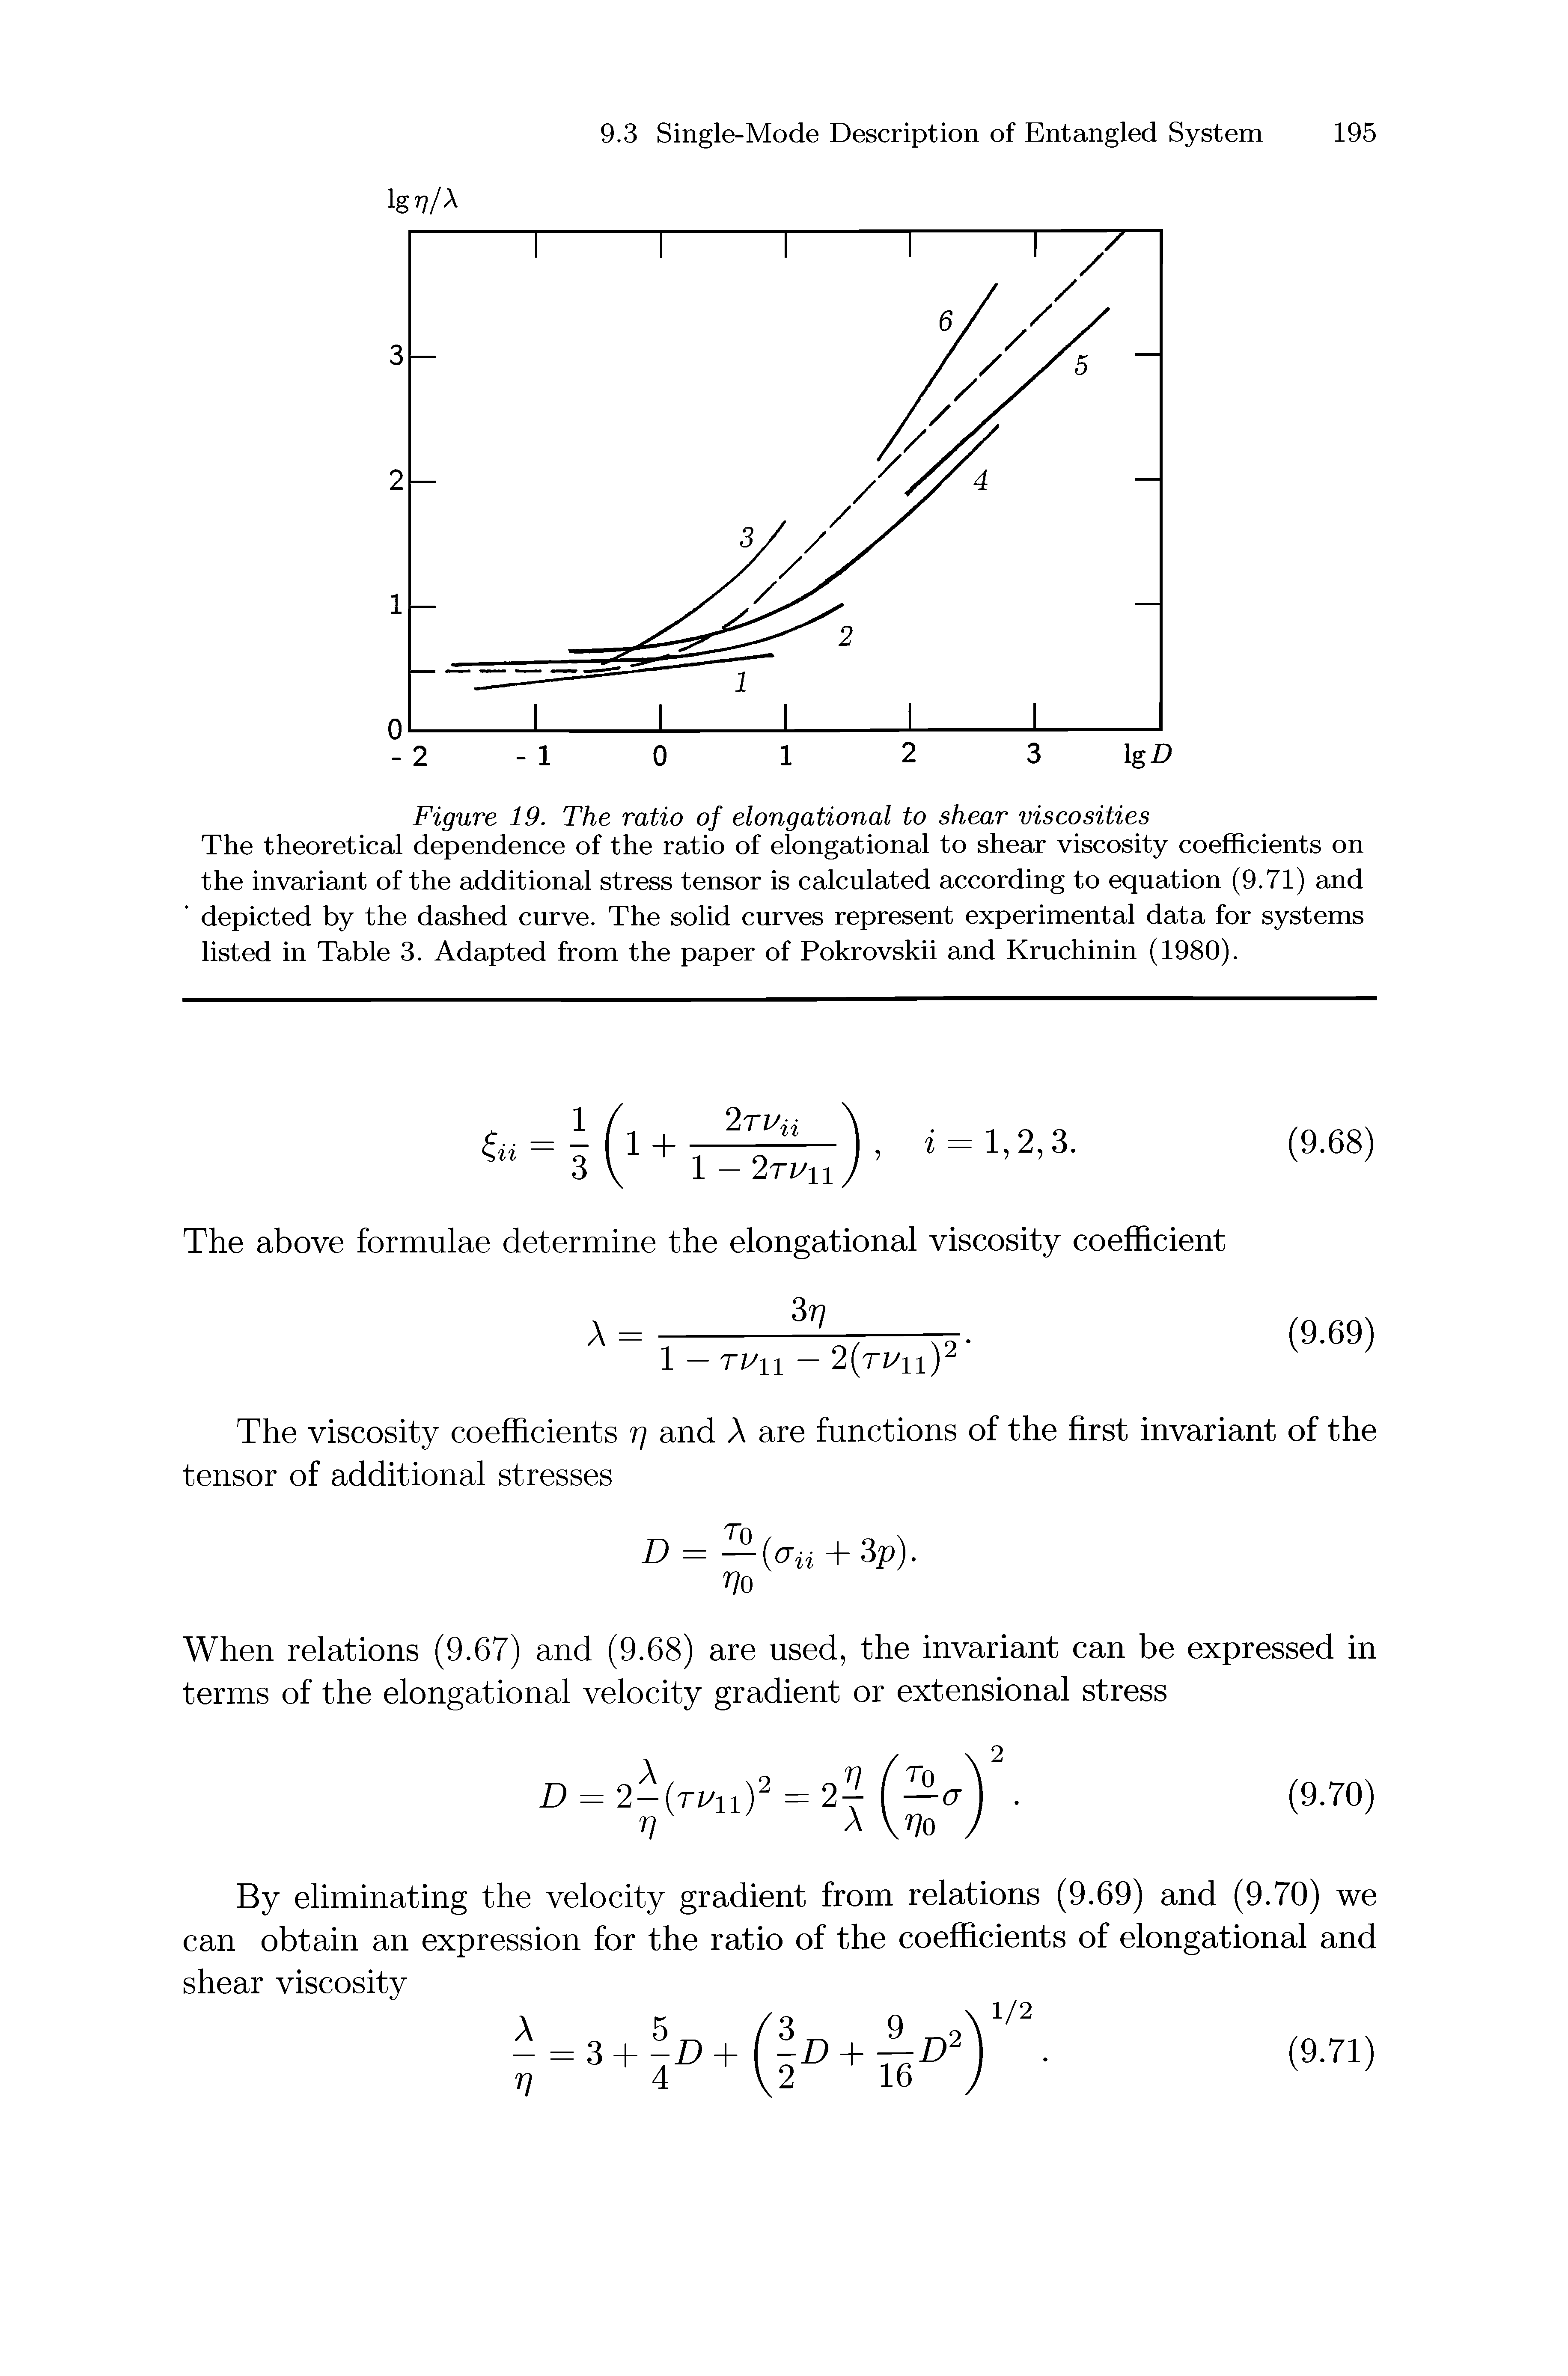 Figure 19. The ratio of elongational to shear viscosities The theoretical dependence of the ratio of elongational to shear viscosity coefficients on the invariant of the additional stress tensor is calculated according to equation (9.71) and depicted by the dashed curve. The solid curves represent experimental data for systems listed in Table 3. Adapted from the paper of Pokrovskii and Kruchinin (1980).